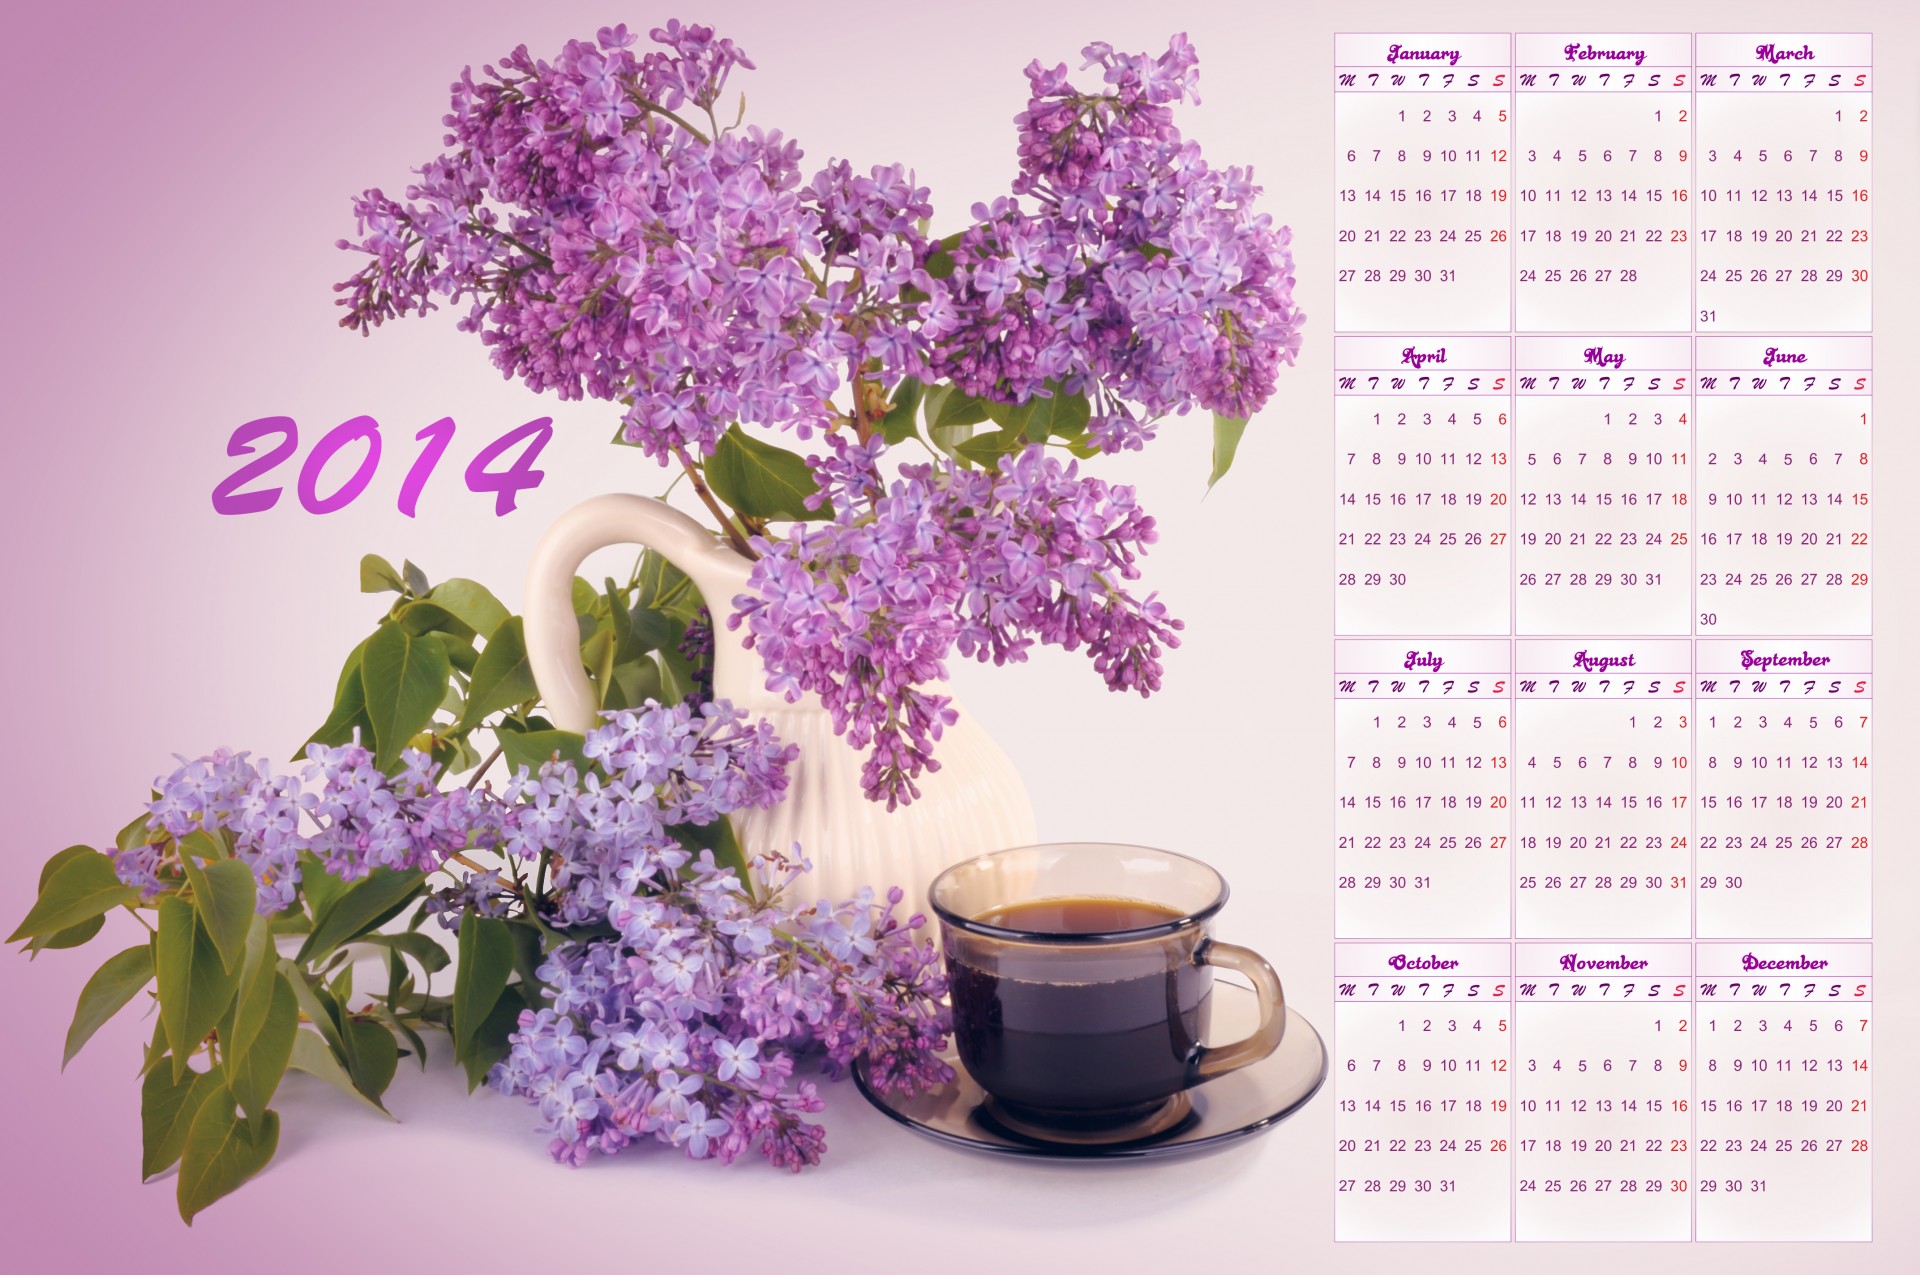 Calendar for 2014 with a bouquet of lilacs and a cup of coffee